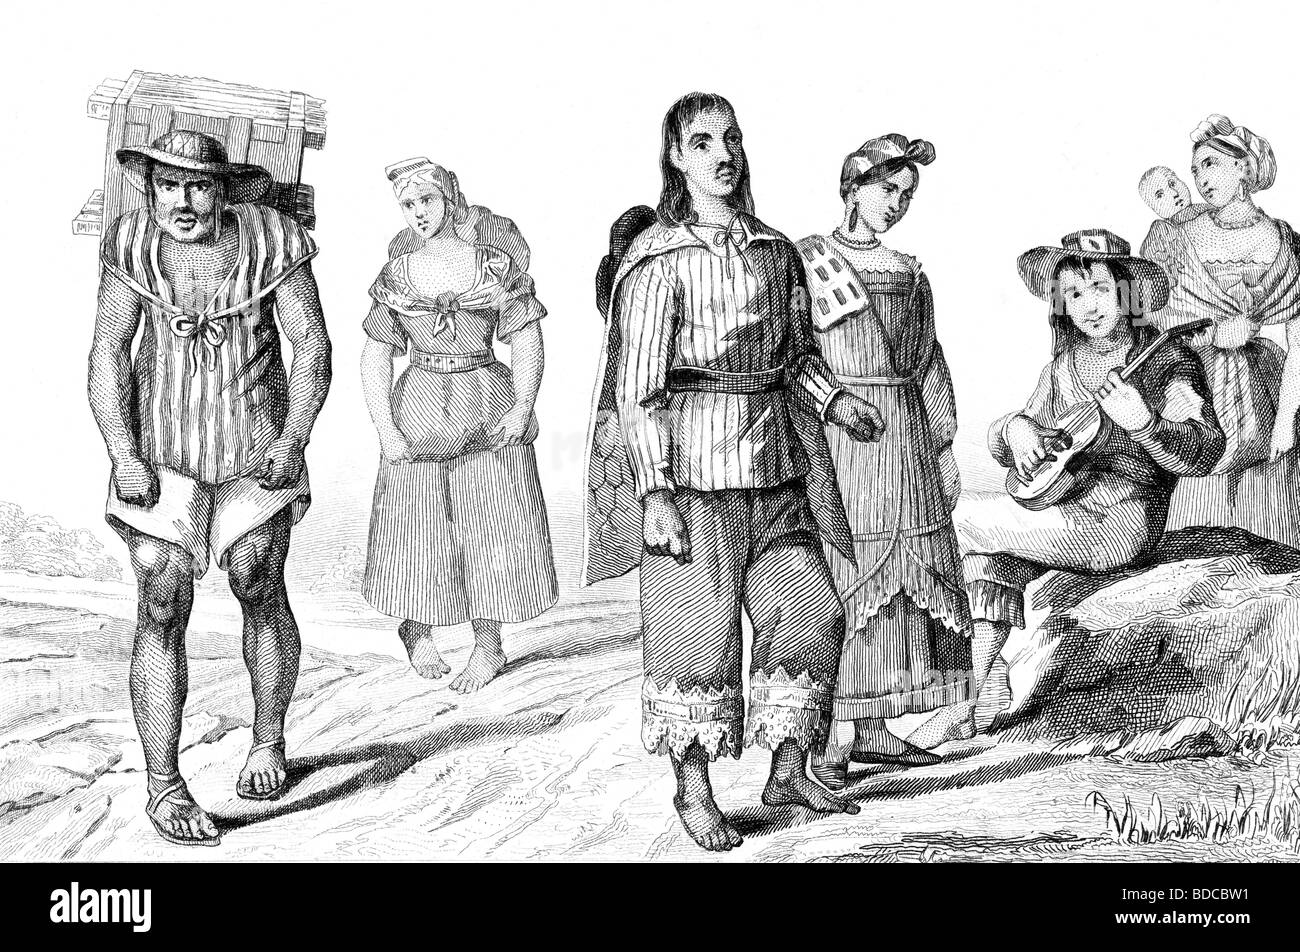 geography / travel, Mexico, people, traditional costumes of the population, Indians, wood engraving, 19th century, Central America, historic, historical, costume, cloth, ethnic, ethnology, indigenous, farmer, farmers, rural population, native, women, woman, dosser, panniers, dossers, porter, porters, hat, sombrero, guitar, music instrument, musicians, CEAM, Stock Photo